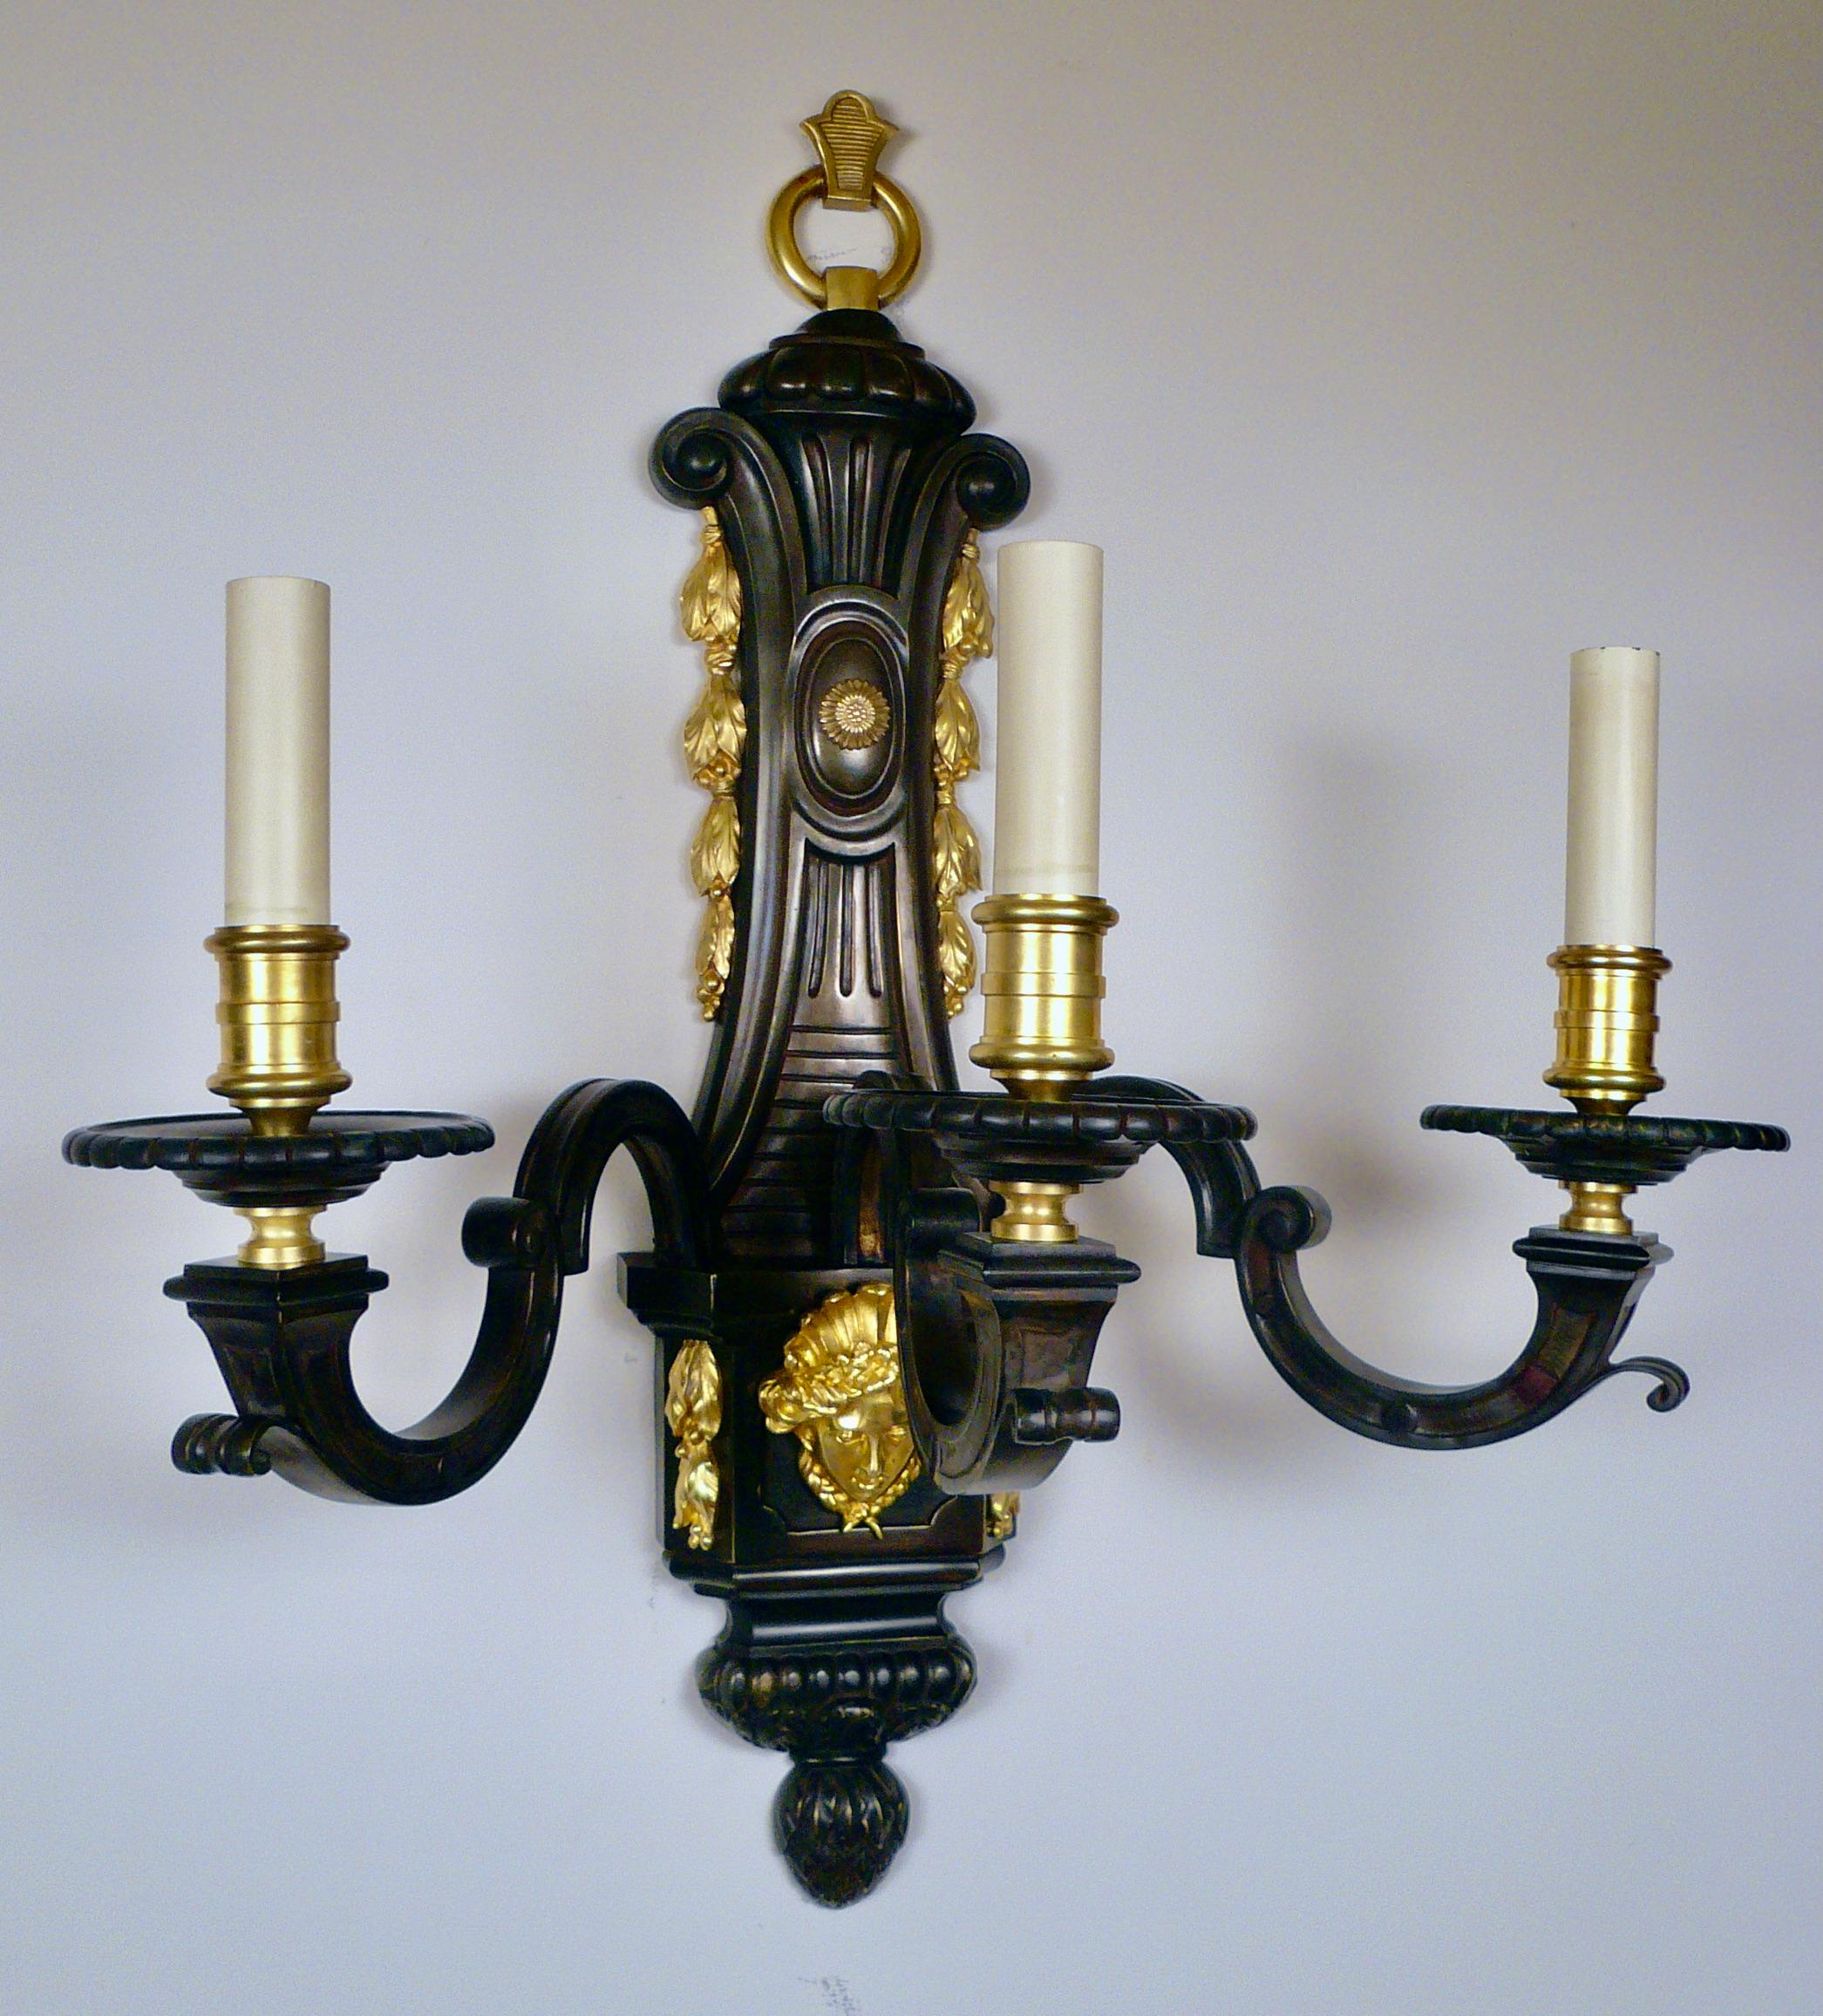 This large and impressive set of four Louis XIV Style bronze sconces are of the finest quality. They feature many Baroque era motifs including foliate swags, acanthus leaves, and Classical busts.
They have been newly re-wired and are ready for use.